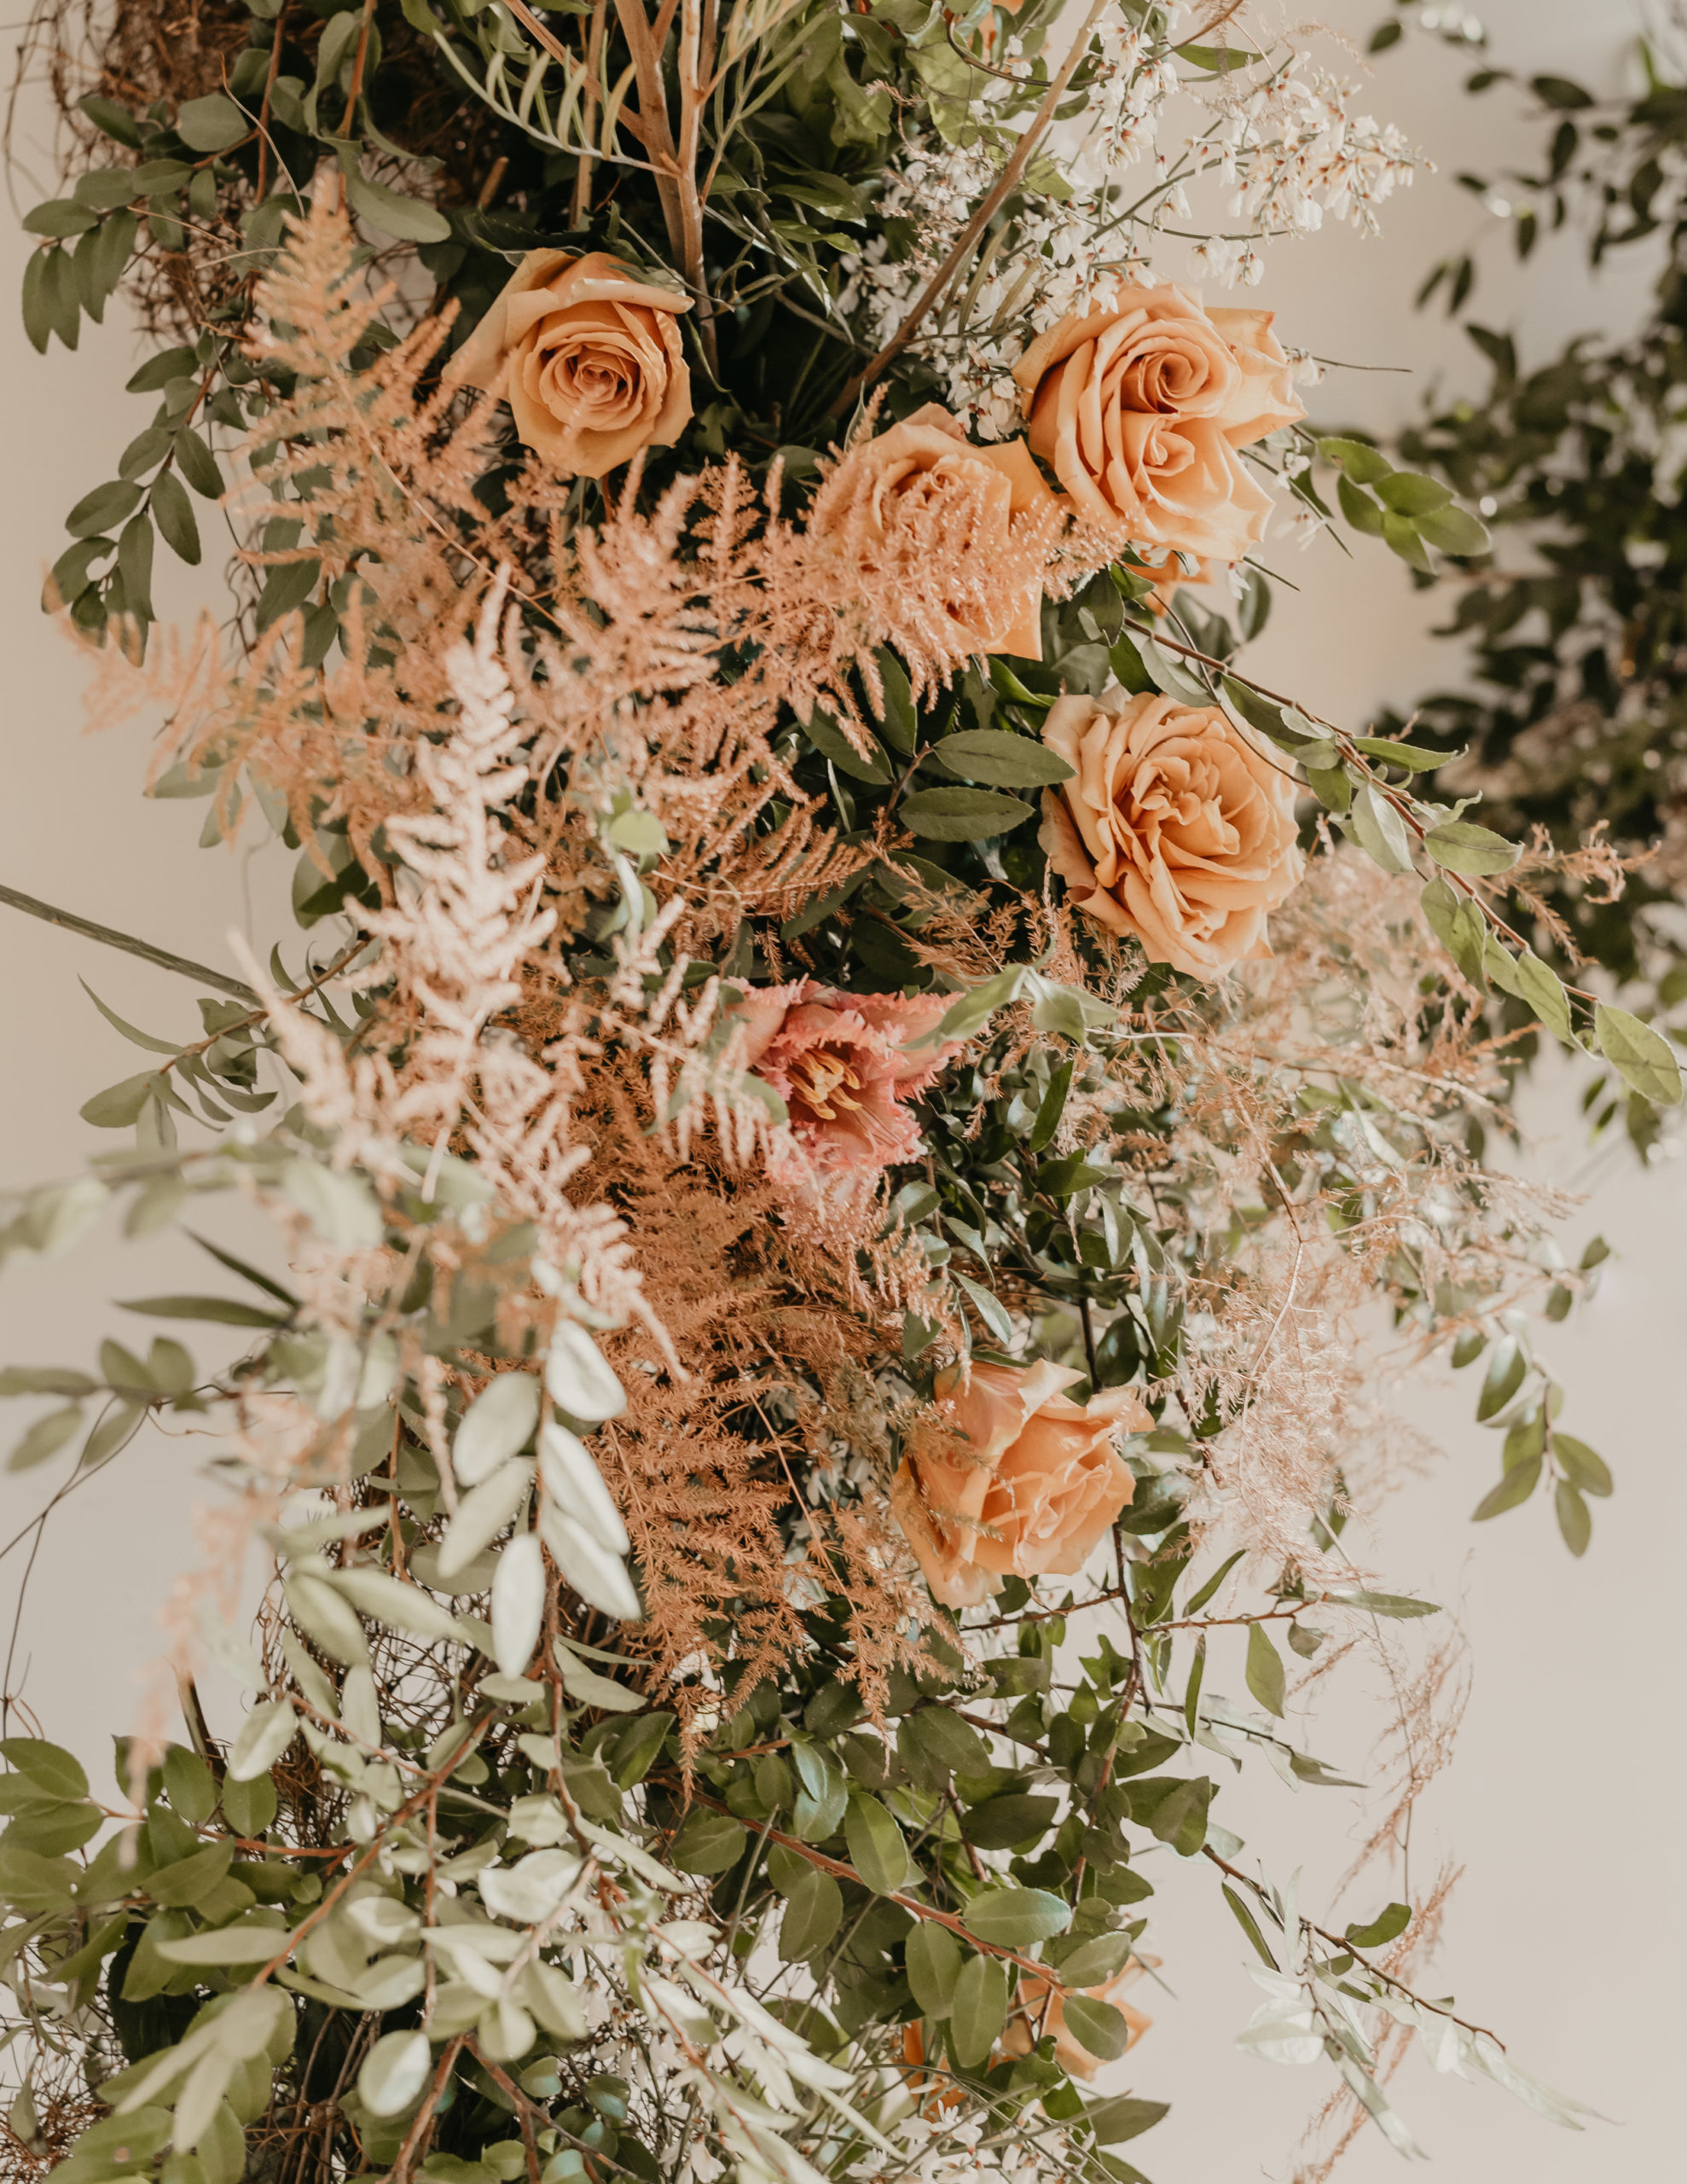 Blush, Green, Tan roses and copper colored florals for the Mid-Century Modern Boho Inspirational Editorial - Pearl Weddings &amp; Events